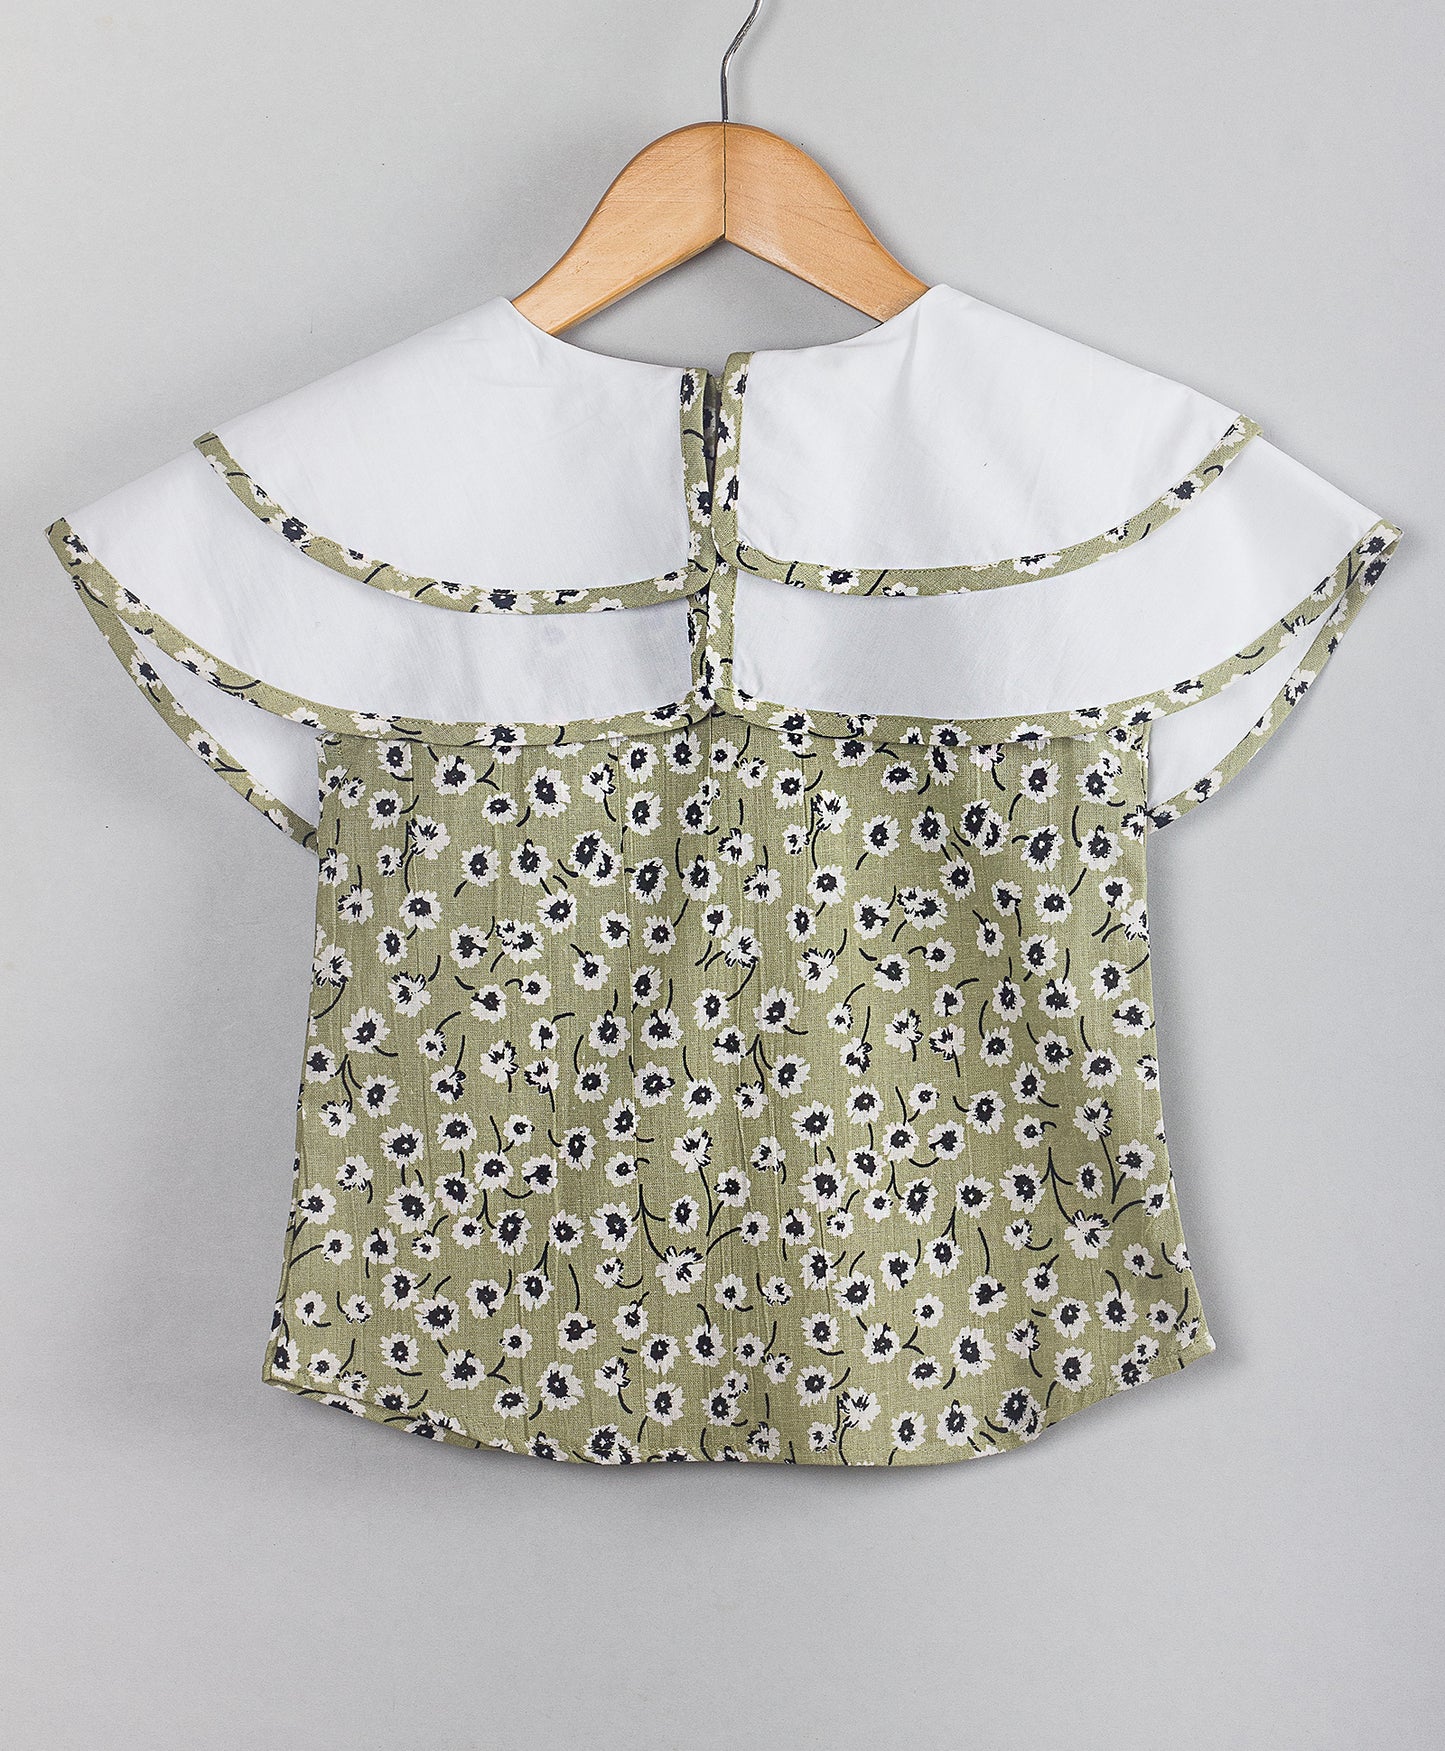 OLIVE GREEN FLORAL PRINT TOP WITH SOLID WHITE DOUBLE SHOULDER FLAPS